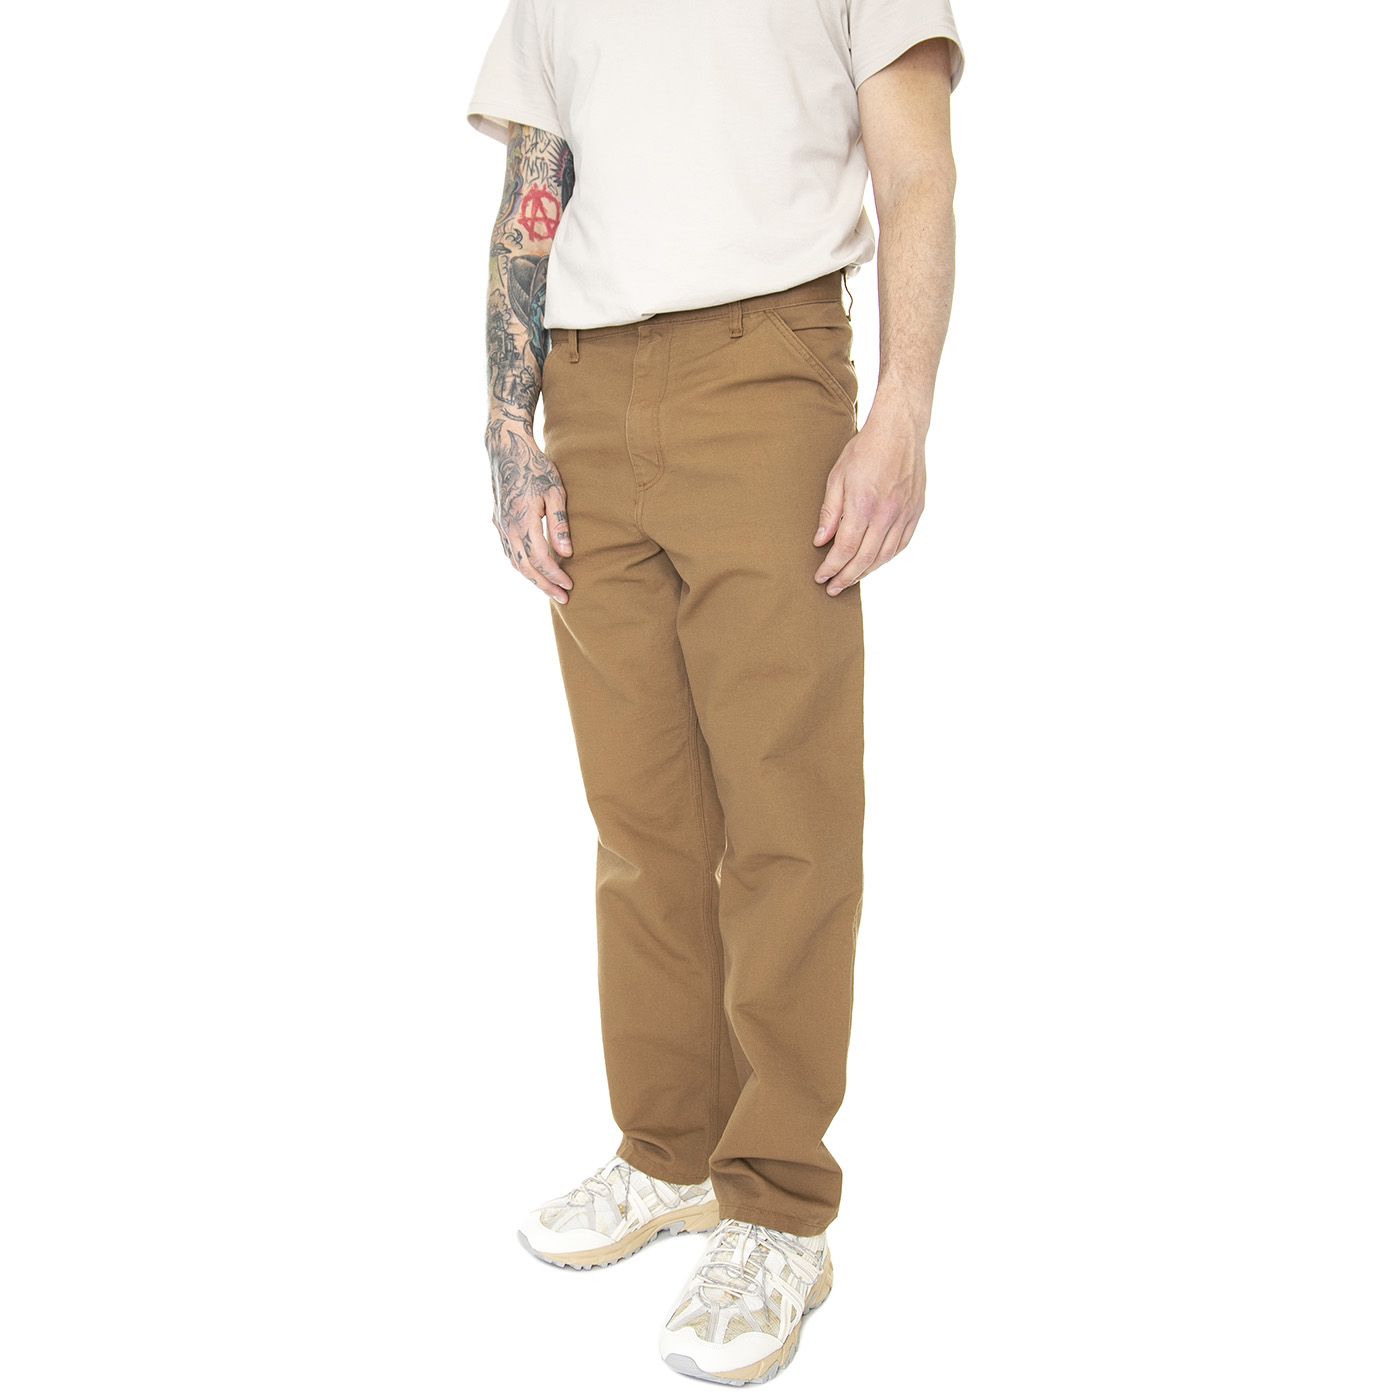 Norse Store  Shipping Worldwide - Carhartt WIP Simple Pant - Hamilton  Brown Rinsed